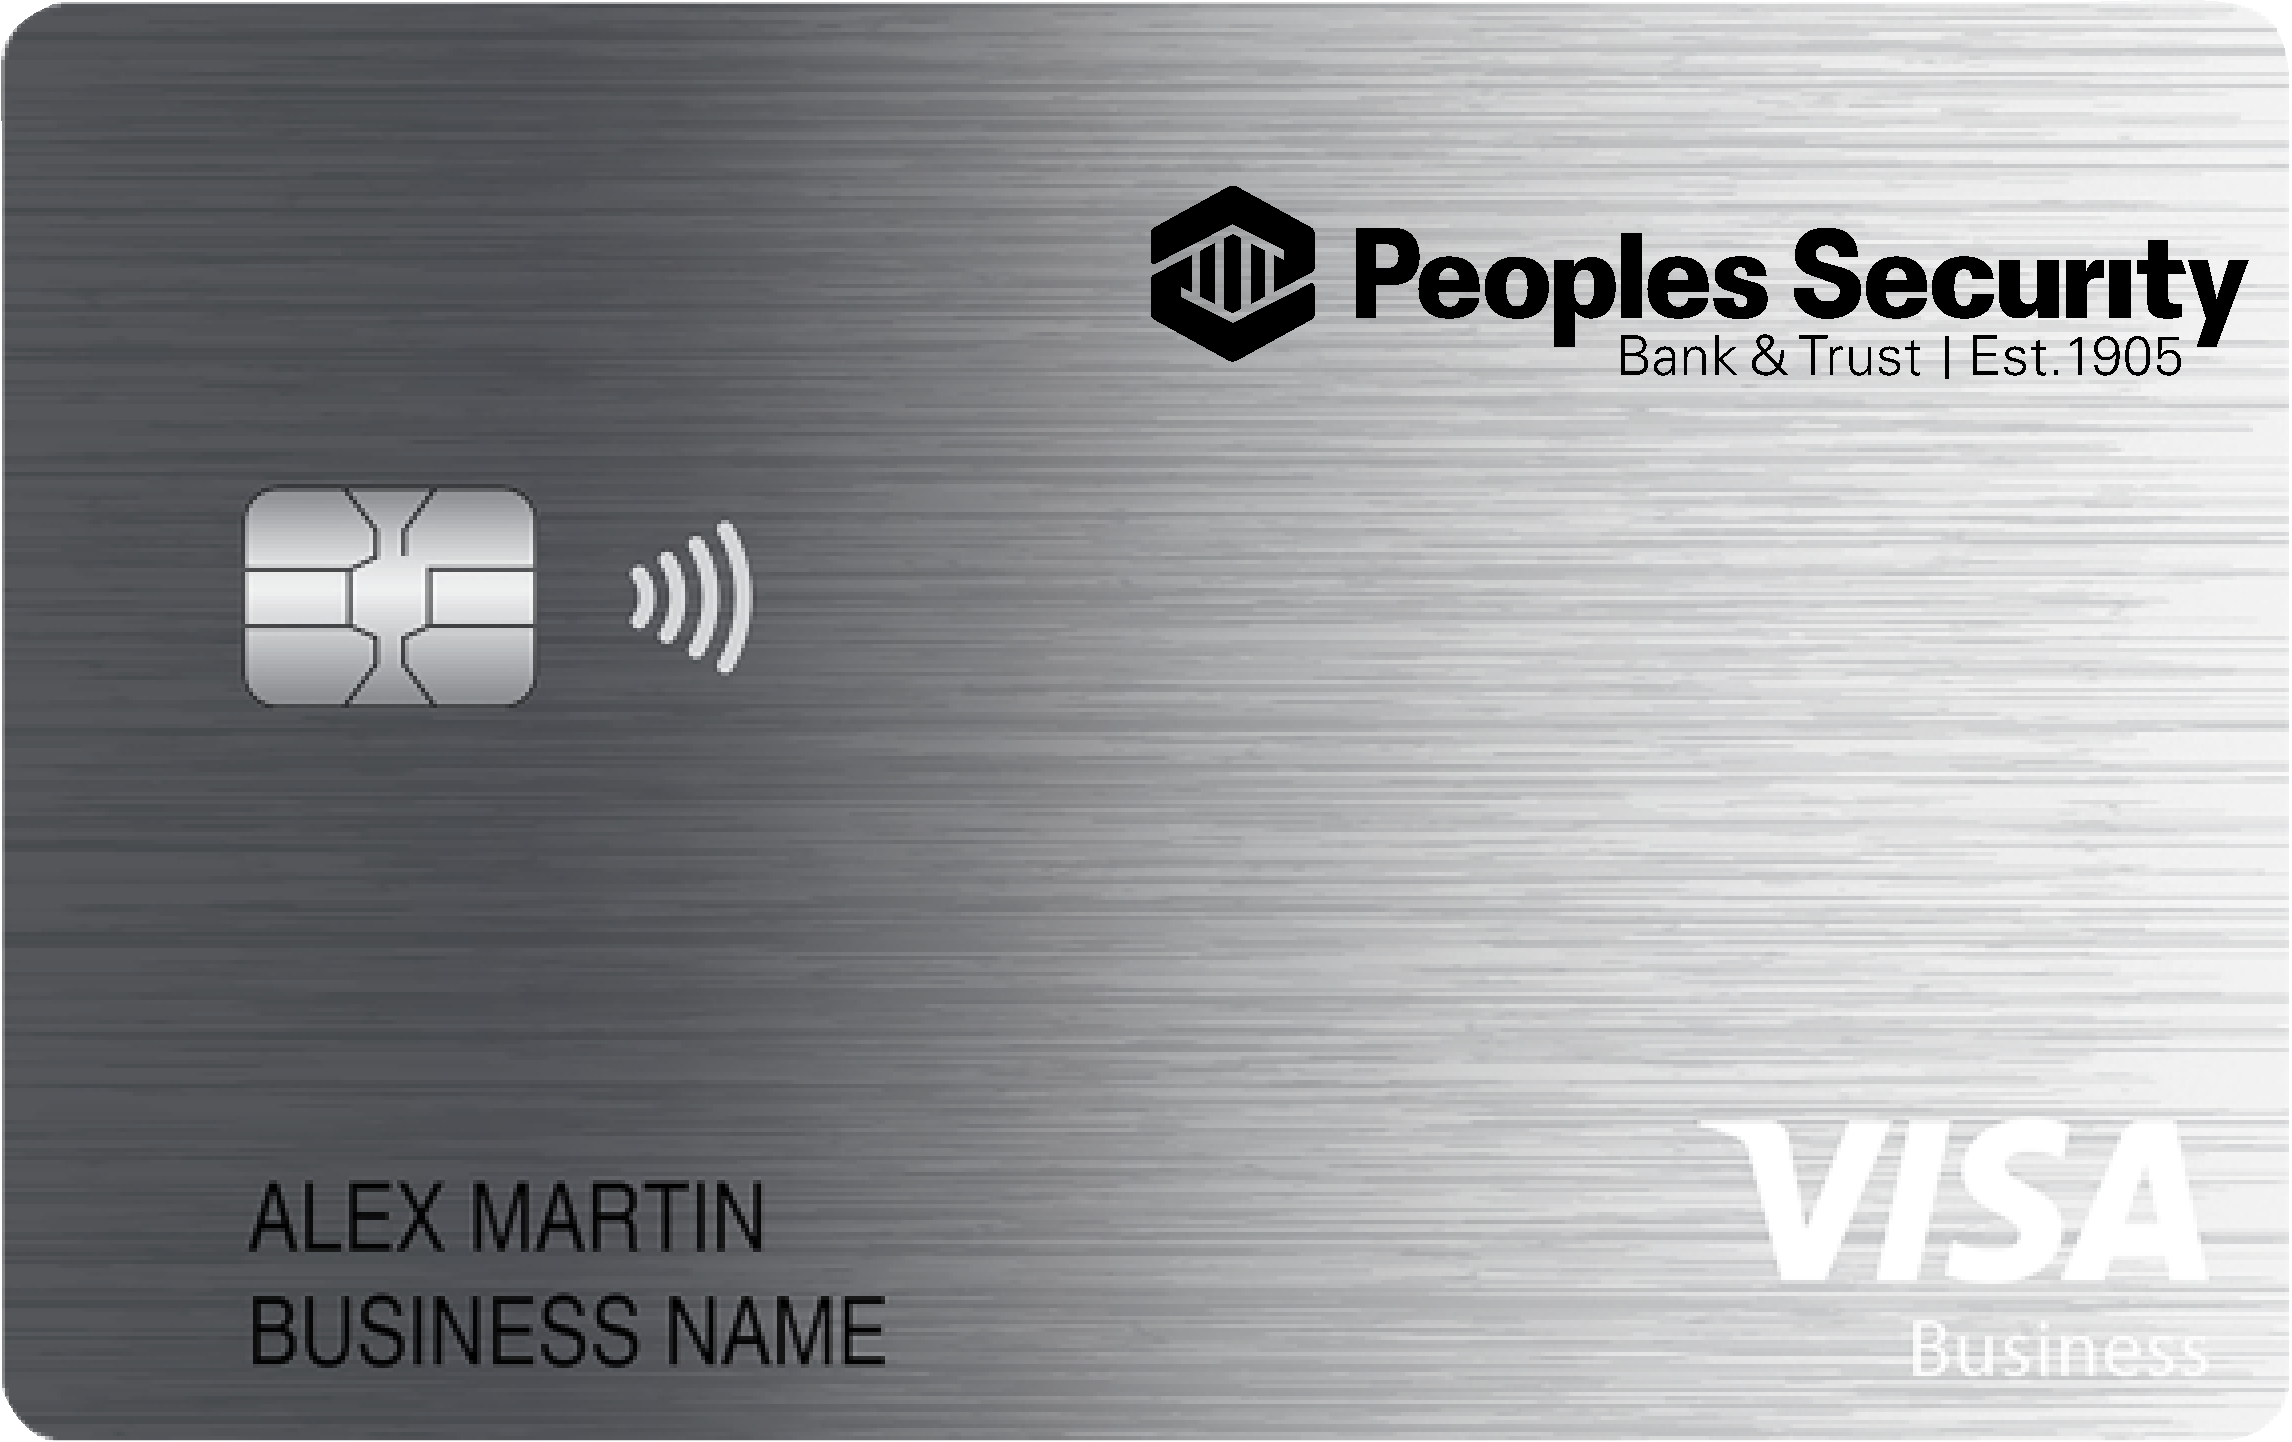 Peoples Security Bank & Trust Co. Business Card Card